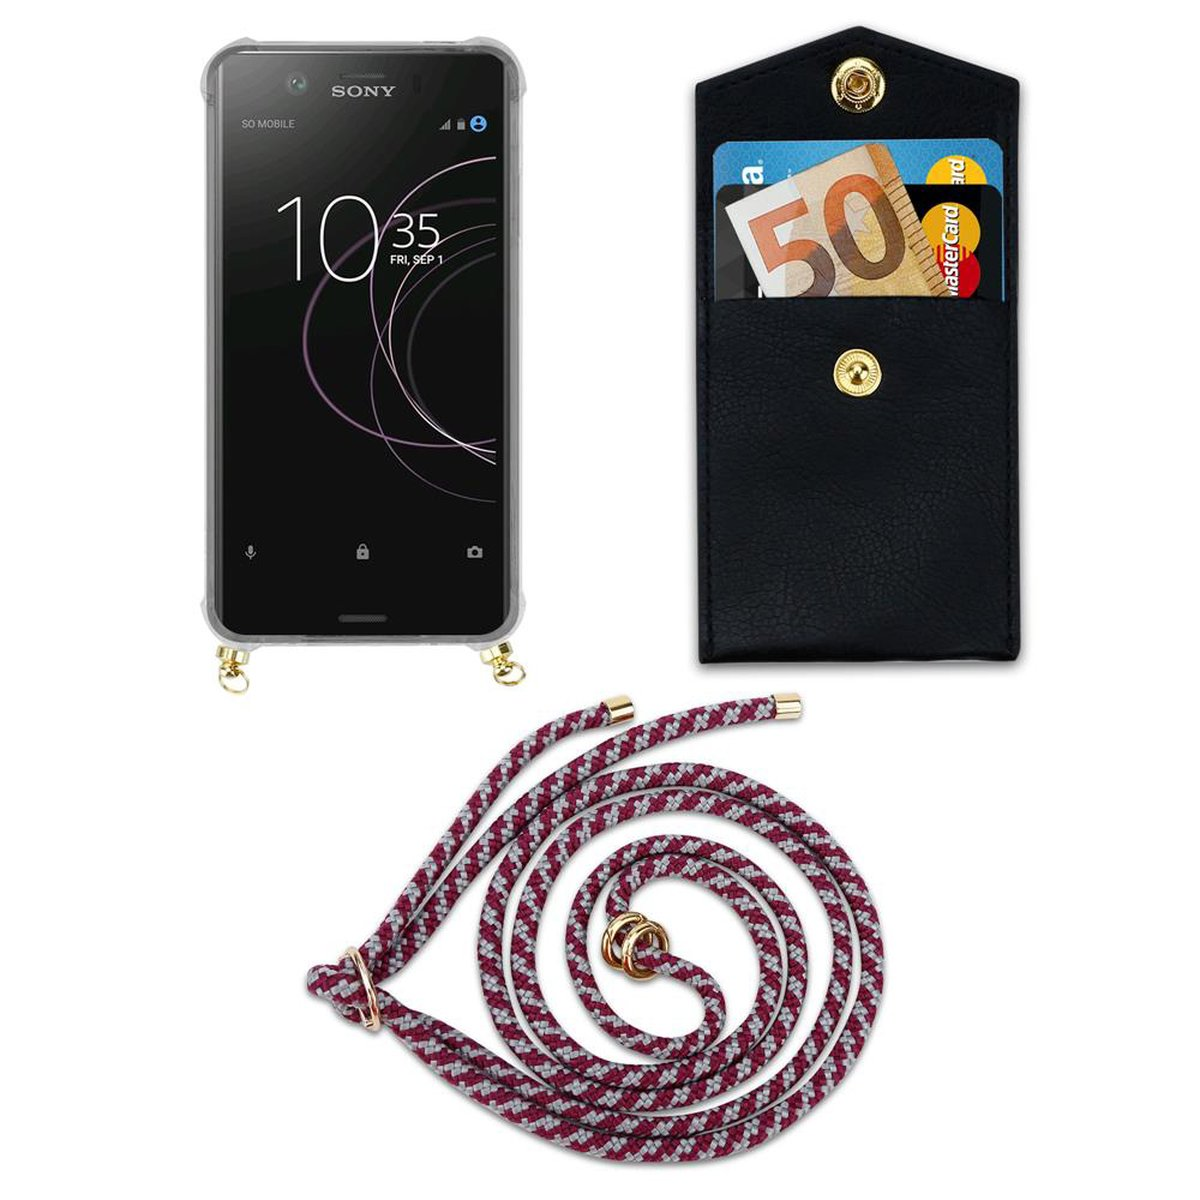 CADORABO Handy Kette Gold Xperia mit Sony, Hülle, und ROT Backcover, Band Kordel WEIß Ringen, XZ1, abnehmbarer